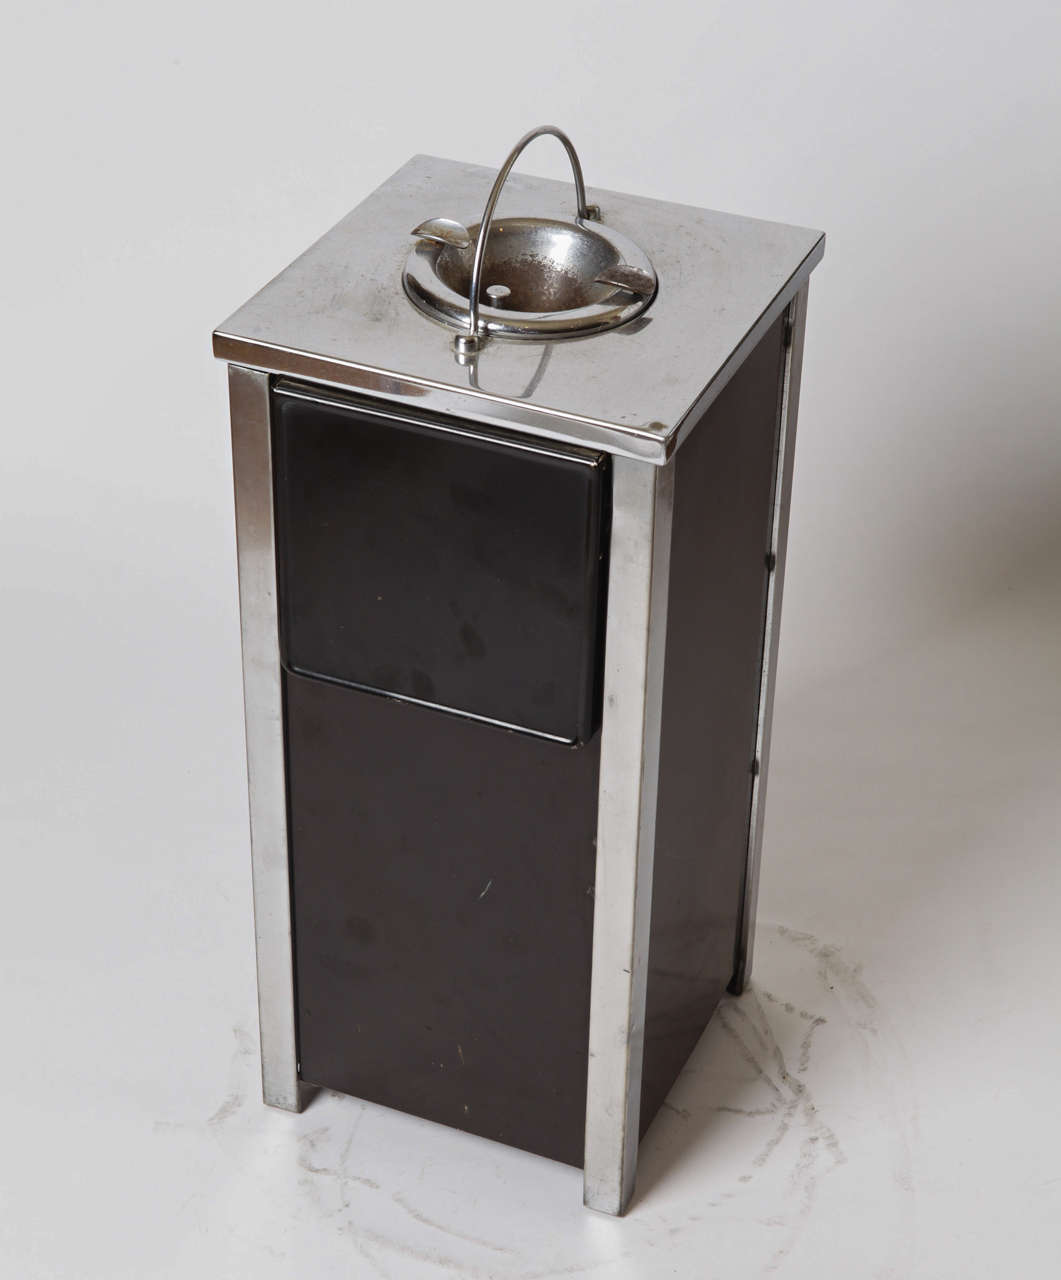 Machine Age Art Deco Smokestand Cocktail Cabinet smoke stand bar

Industrial design classic smoker with collapsible shelves and inside storage.
Enameled and chromed steel.
Ash cup has substantial surface wear, otherwise good condition.
Operating